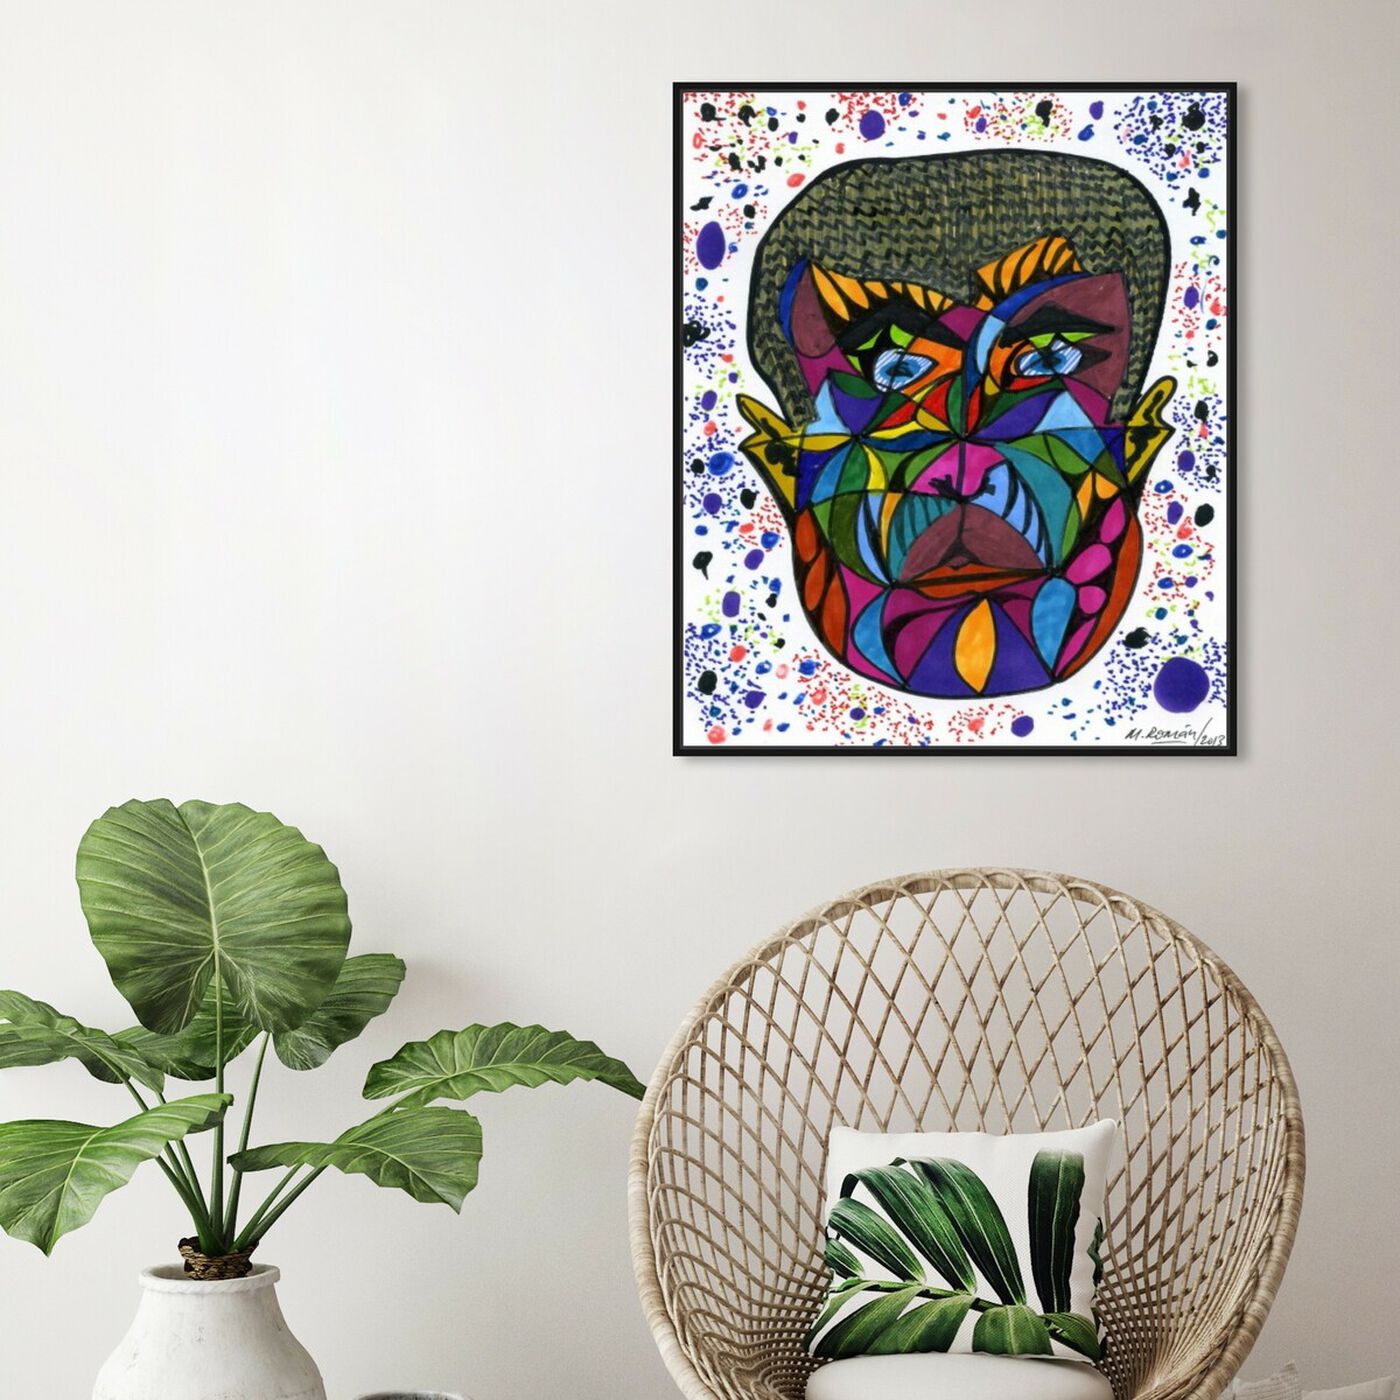 Hanging view of His Face featuring abstract and shapes art.